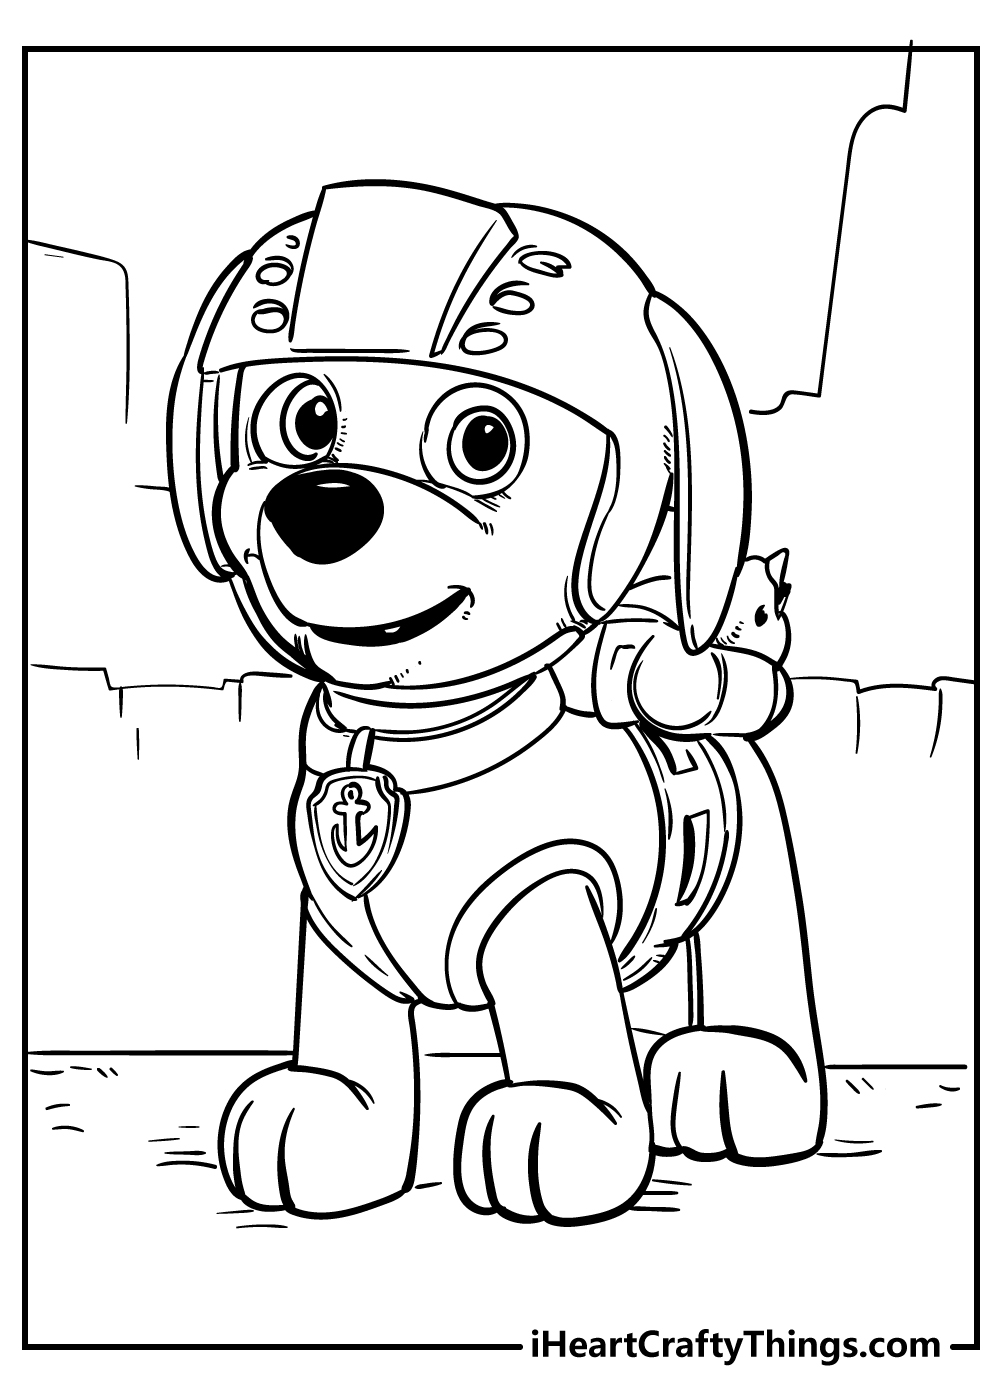 Paw Patrol Coloring Pages Updated 20